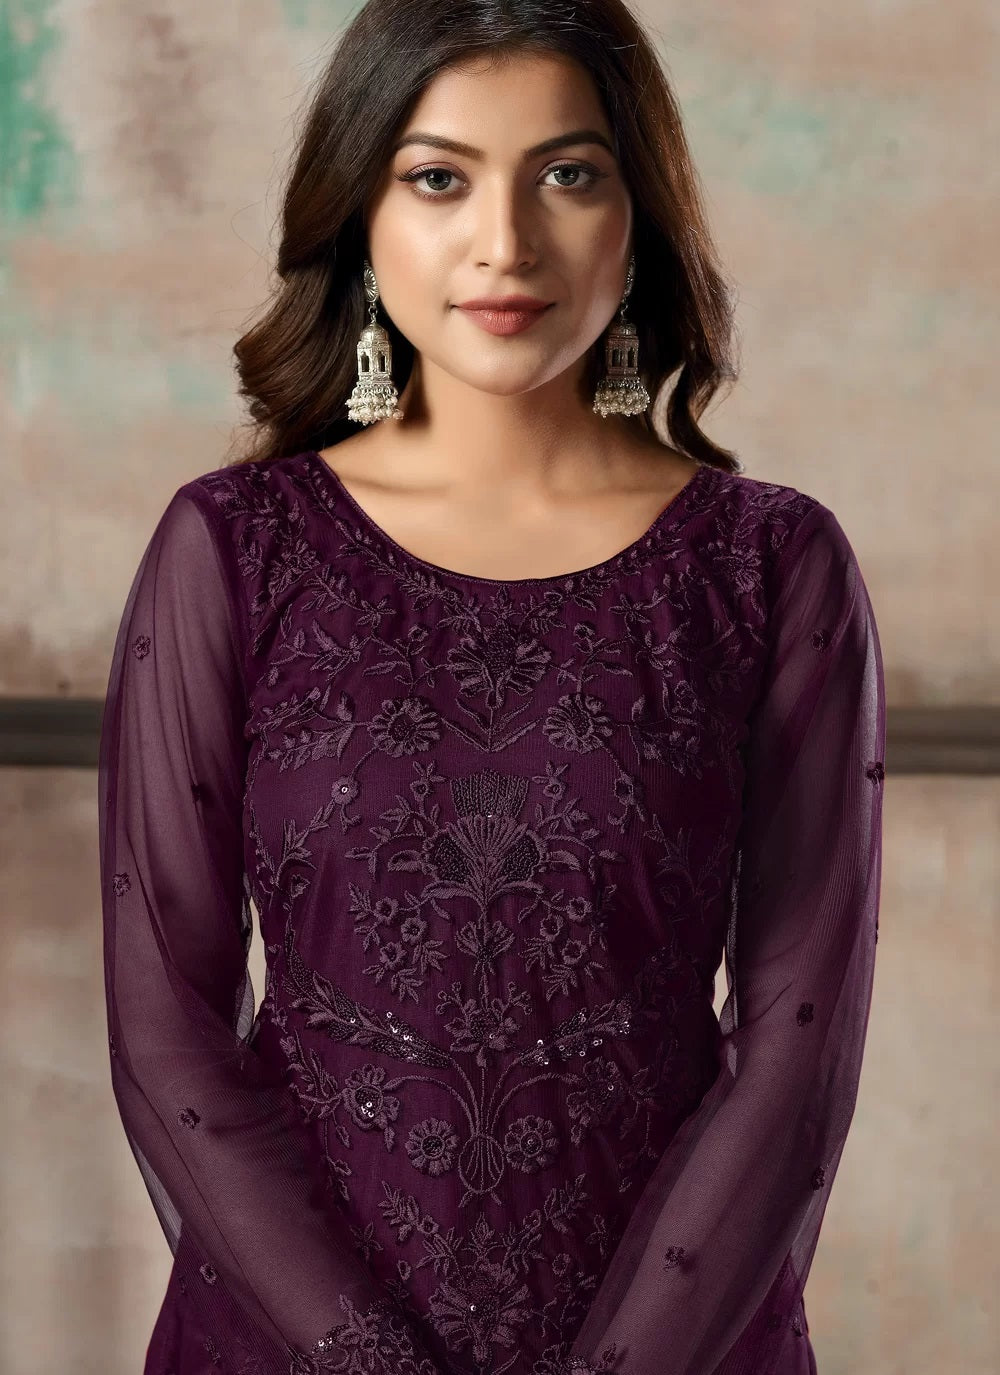 Straight Style Embroidered Pakistani Suit in Wine